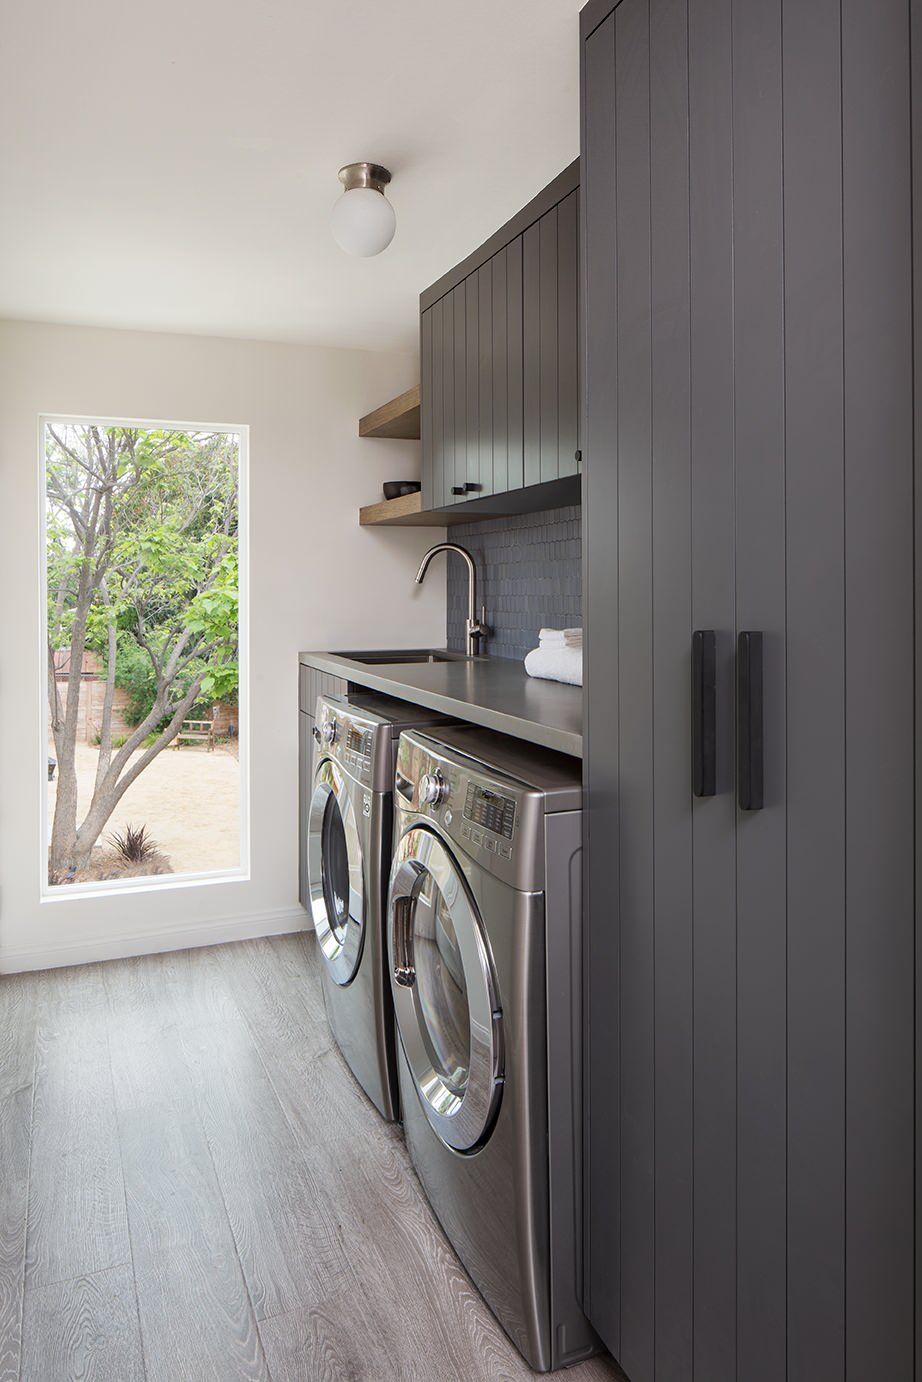 Laundry Room Accessories - Contemporary - Laundry Room - Toronto - by  Organized Interiors